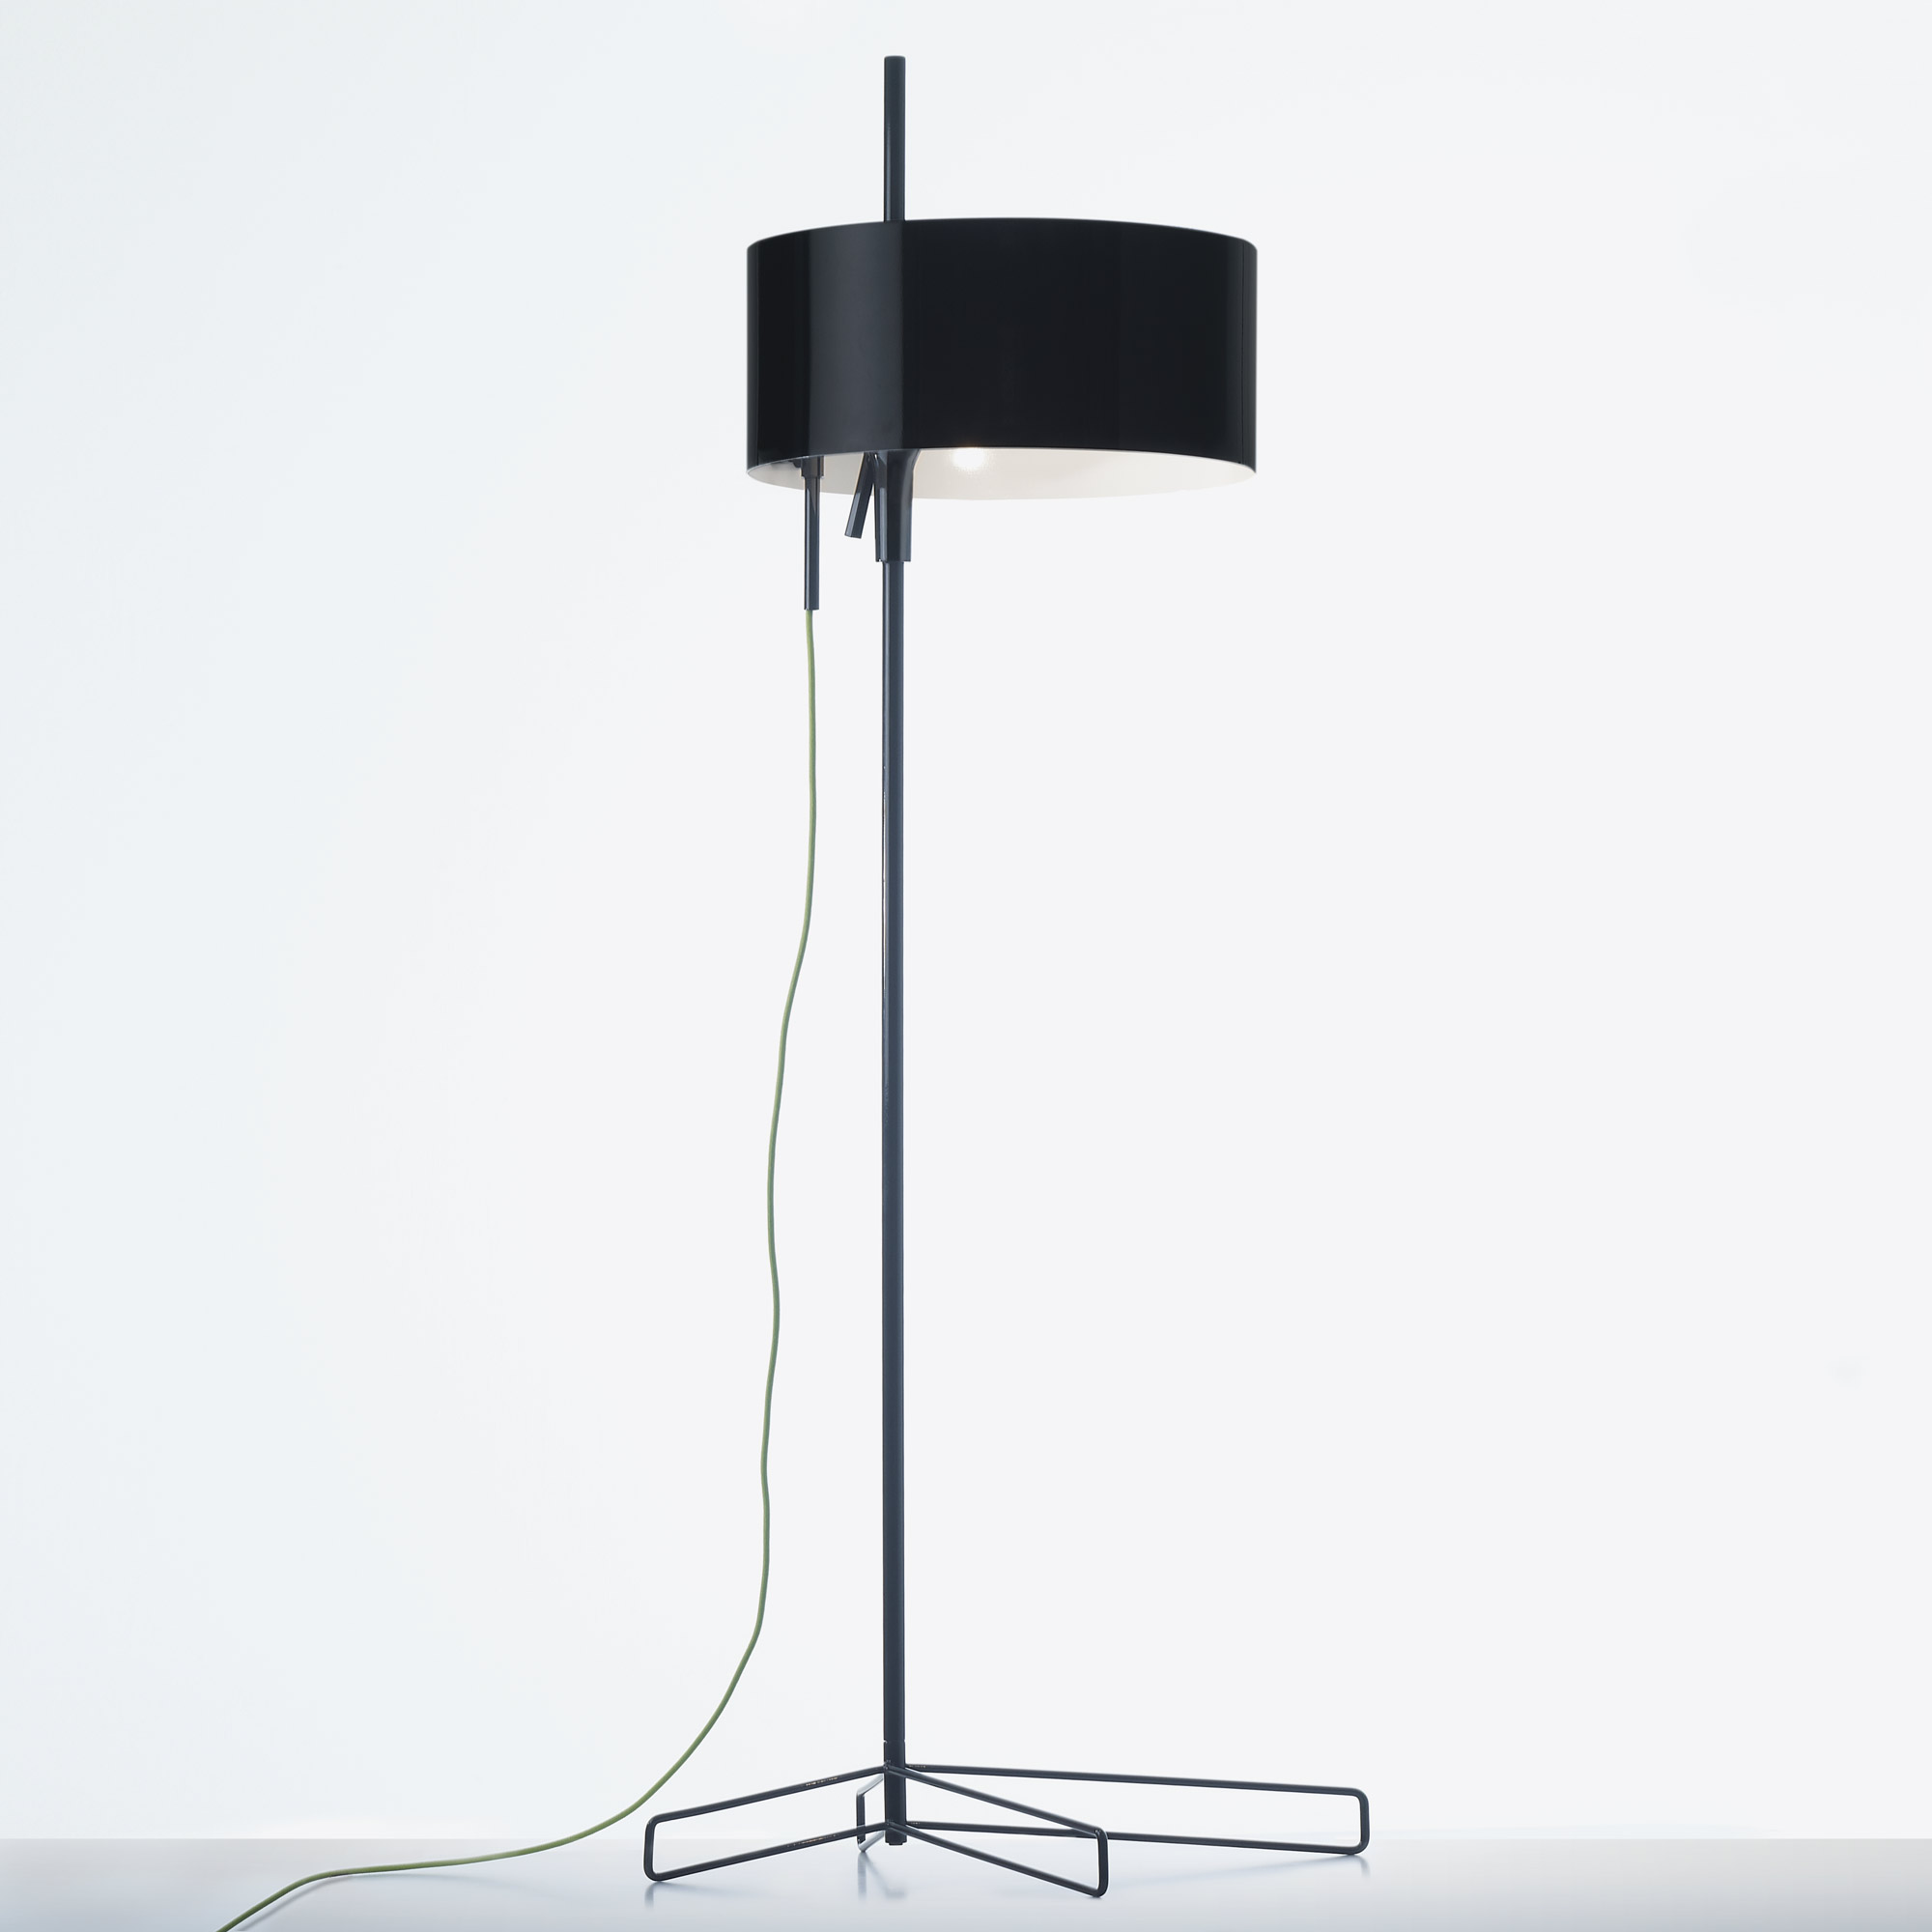 3G Lamp by Mario Ruiz for B Lux